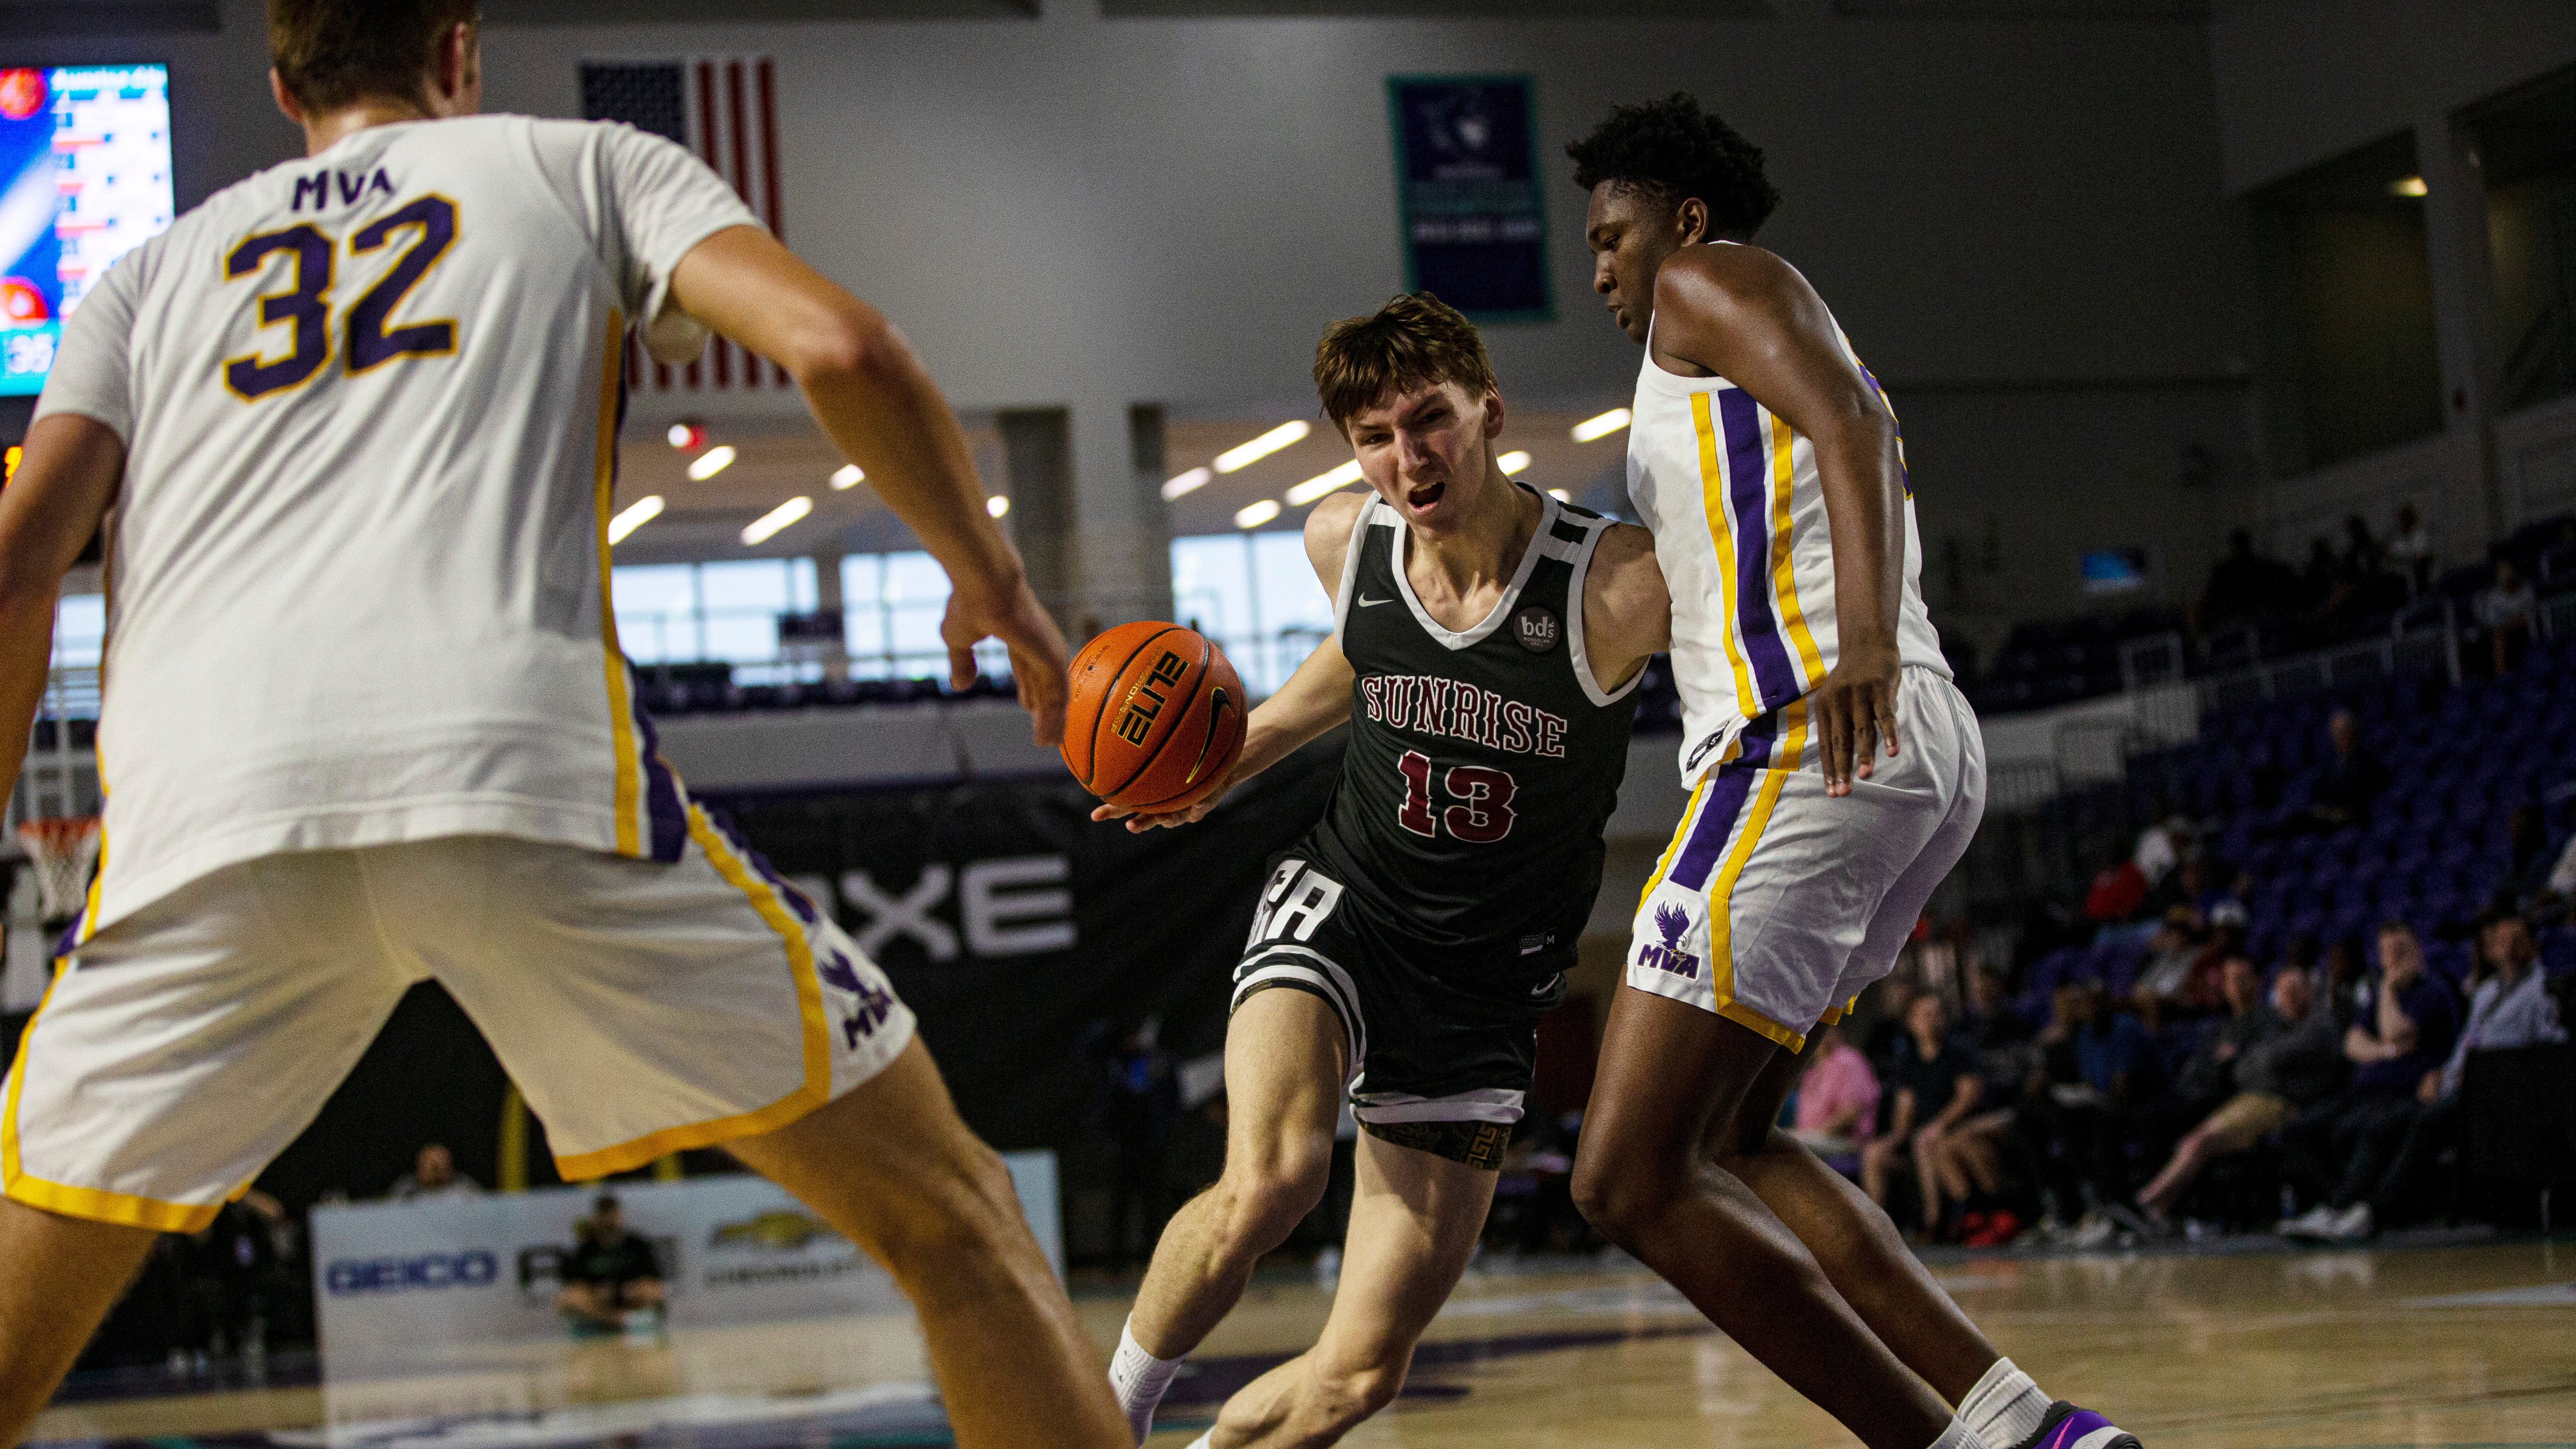 Matas Buzelis from Sunrise Christian Academy drives to the basket during the GEICO High School Nationals quarterfinal against Montverde at Suncoast Credit Union Arena on Thursday, March 30, 2023.